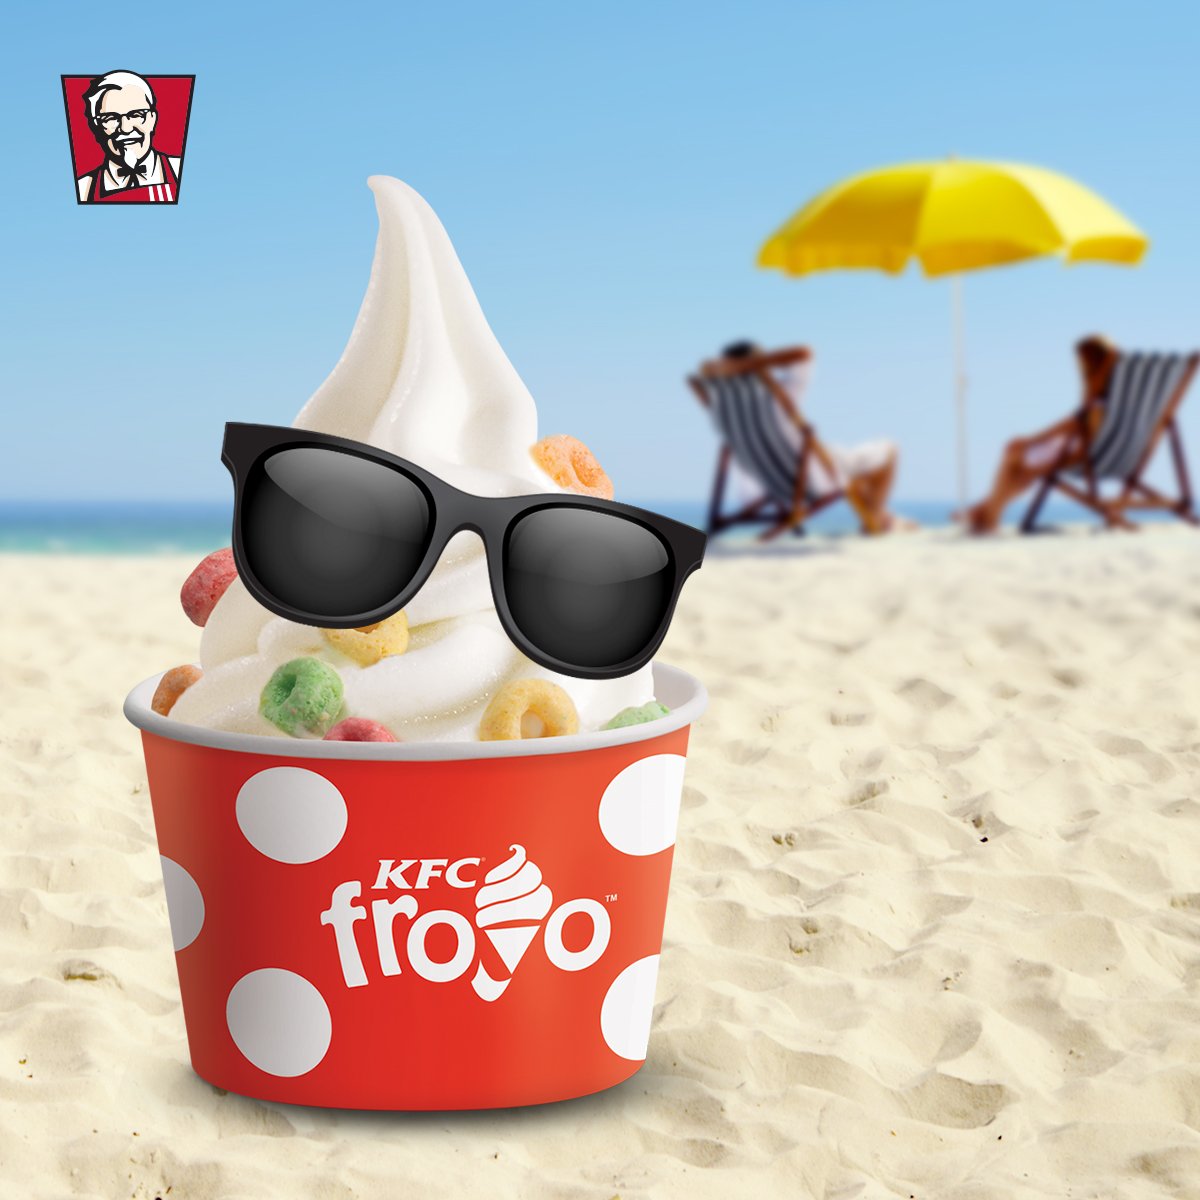 Wind down the week with something cool... Like the #KFCFroyo!